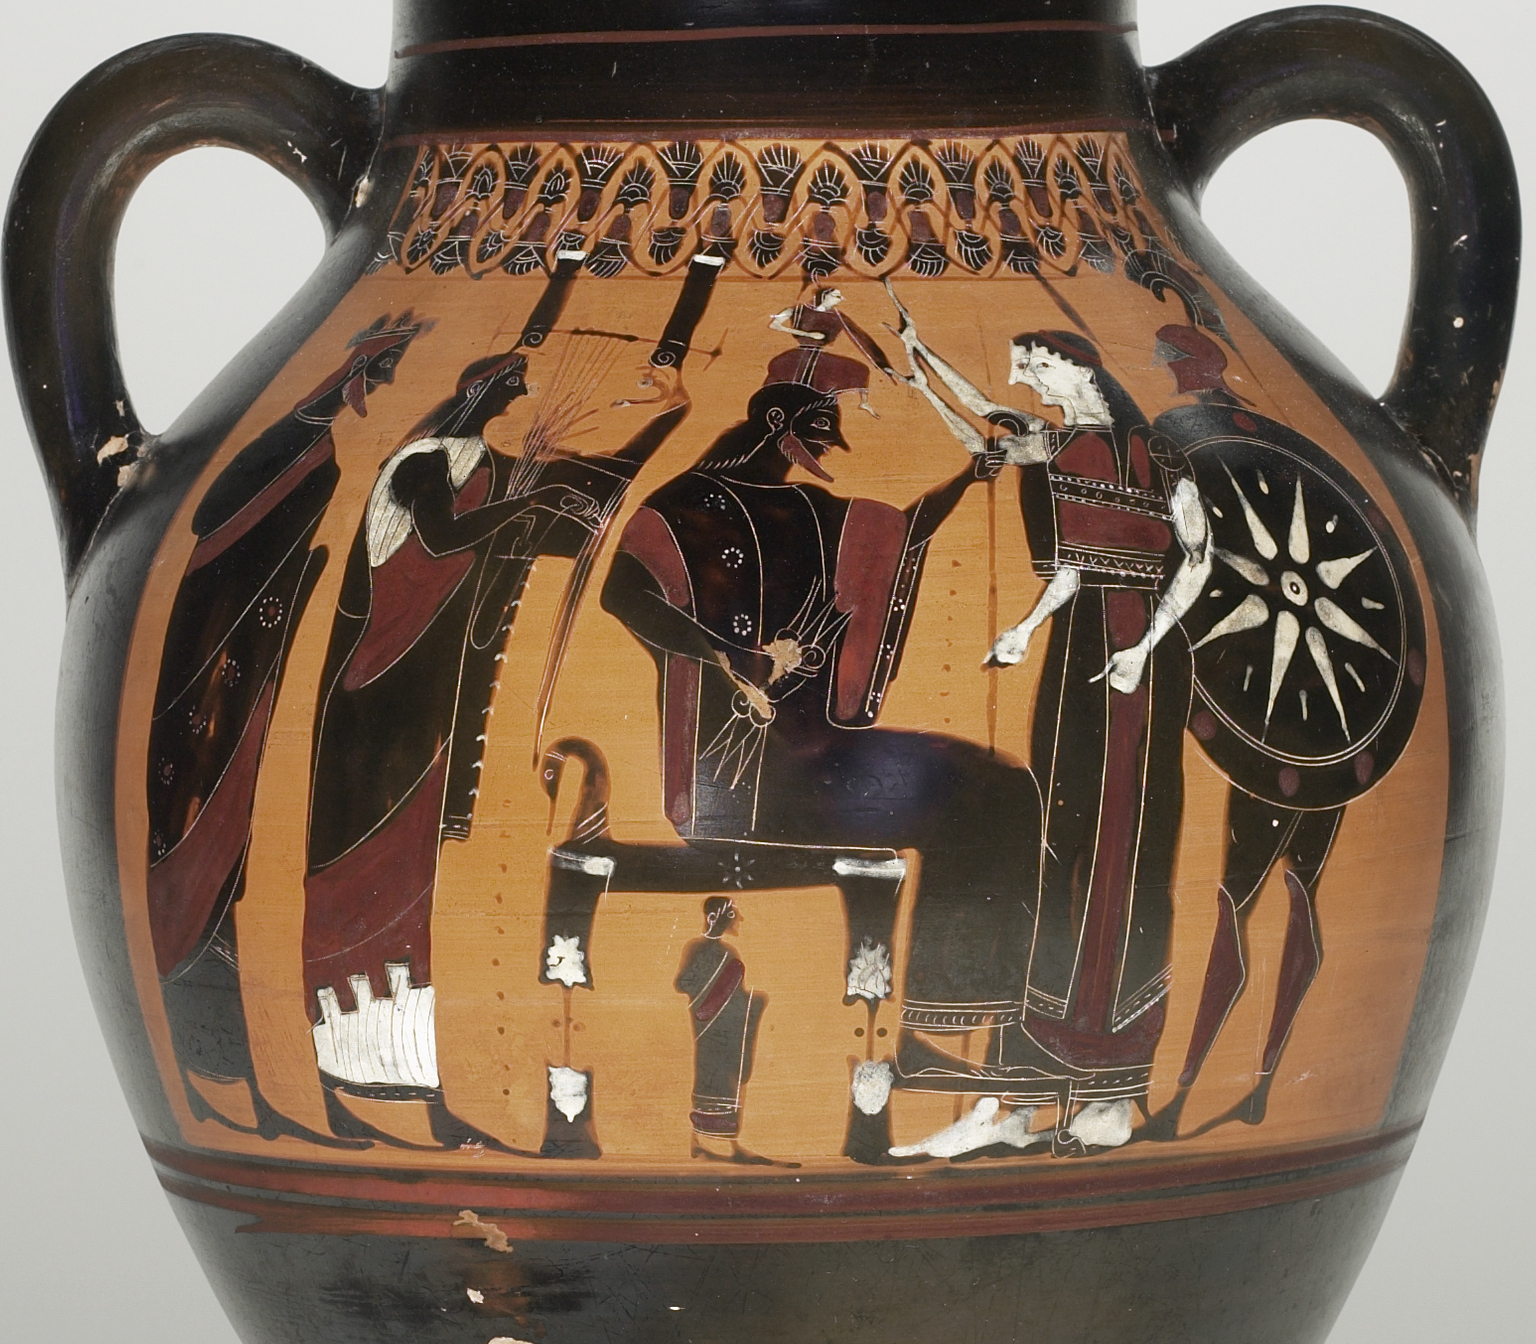 Zeus is throned. A small Athena, fully armed and armoured, leaps from his head. Other gods stand watching, including Ares bearing a large shield and wearing a plumed helm.